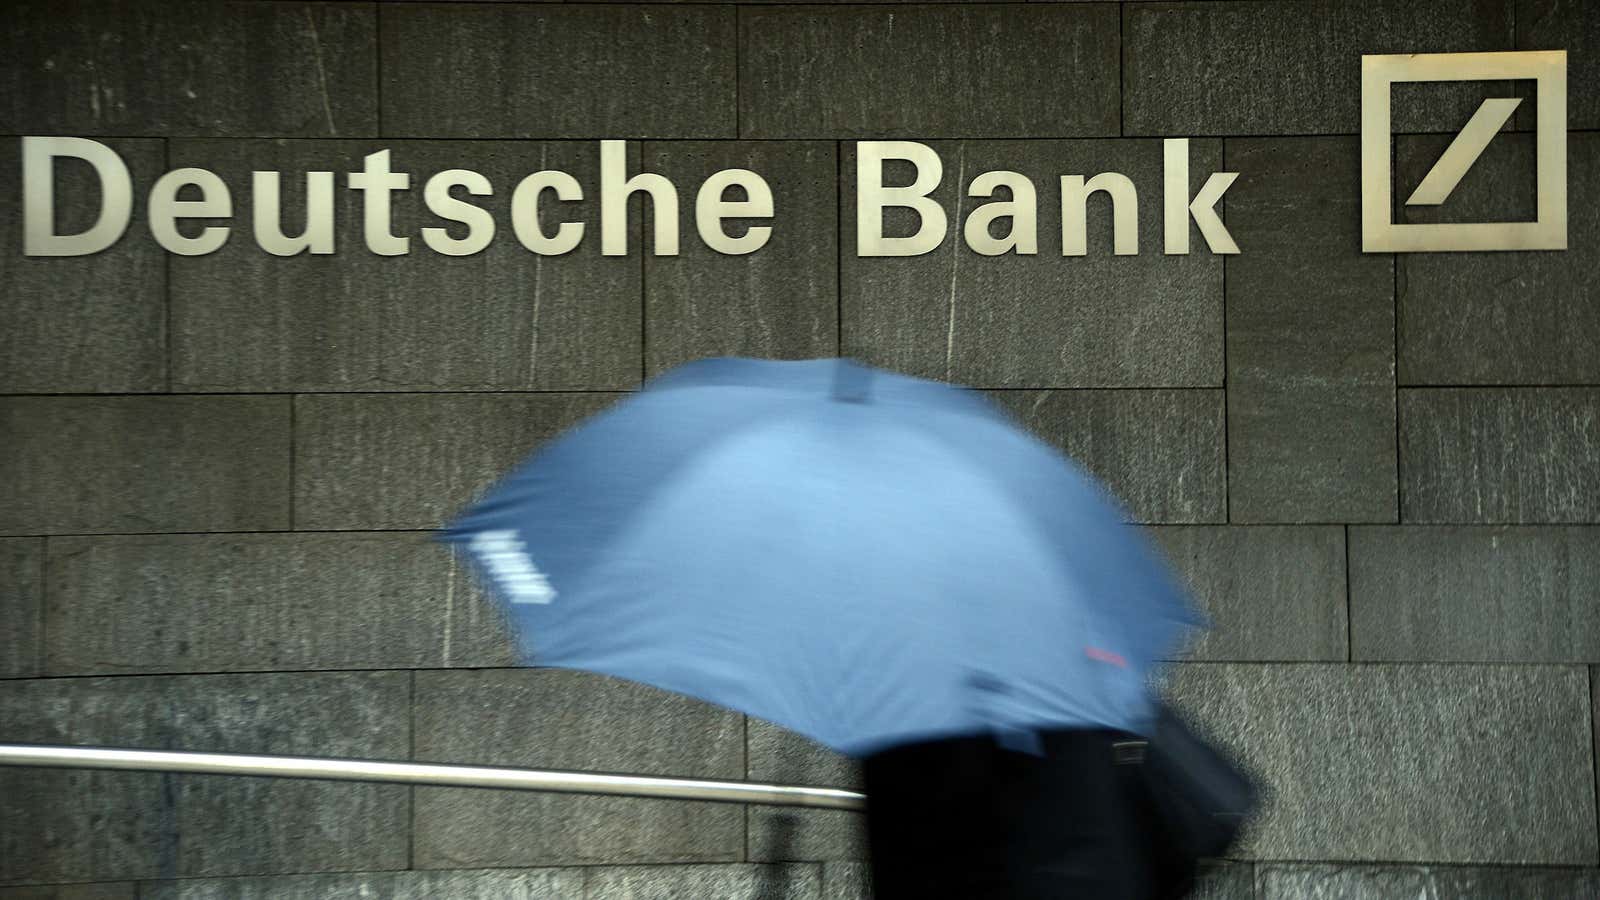 A rainy but not necessarily stormy forecast for Deutsche Bank.